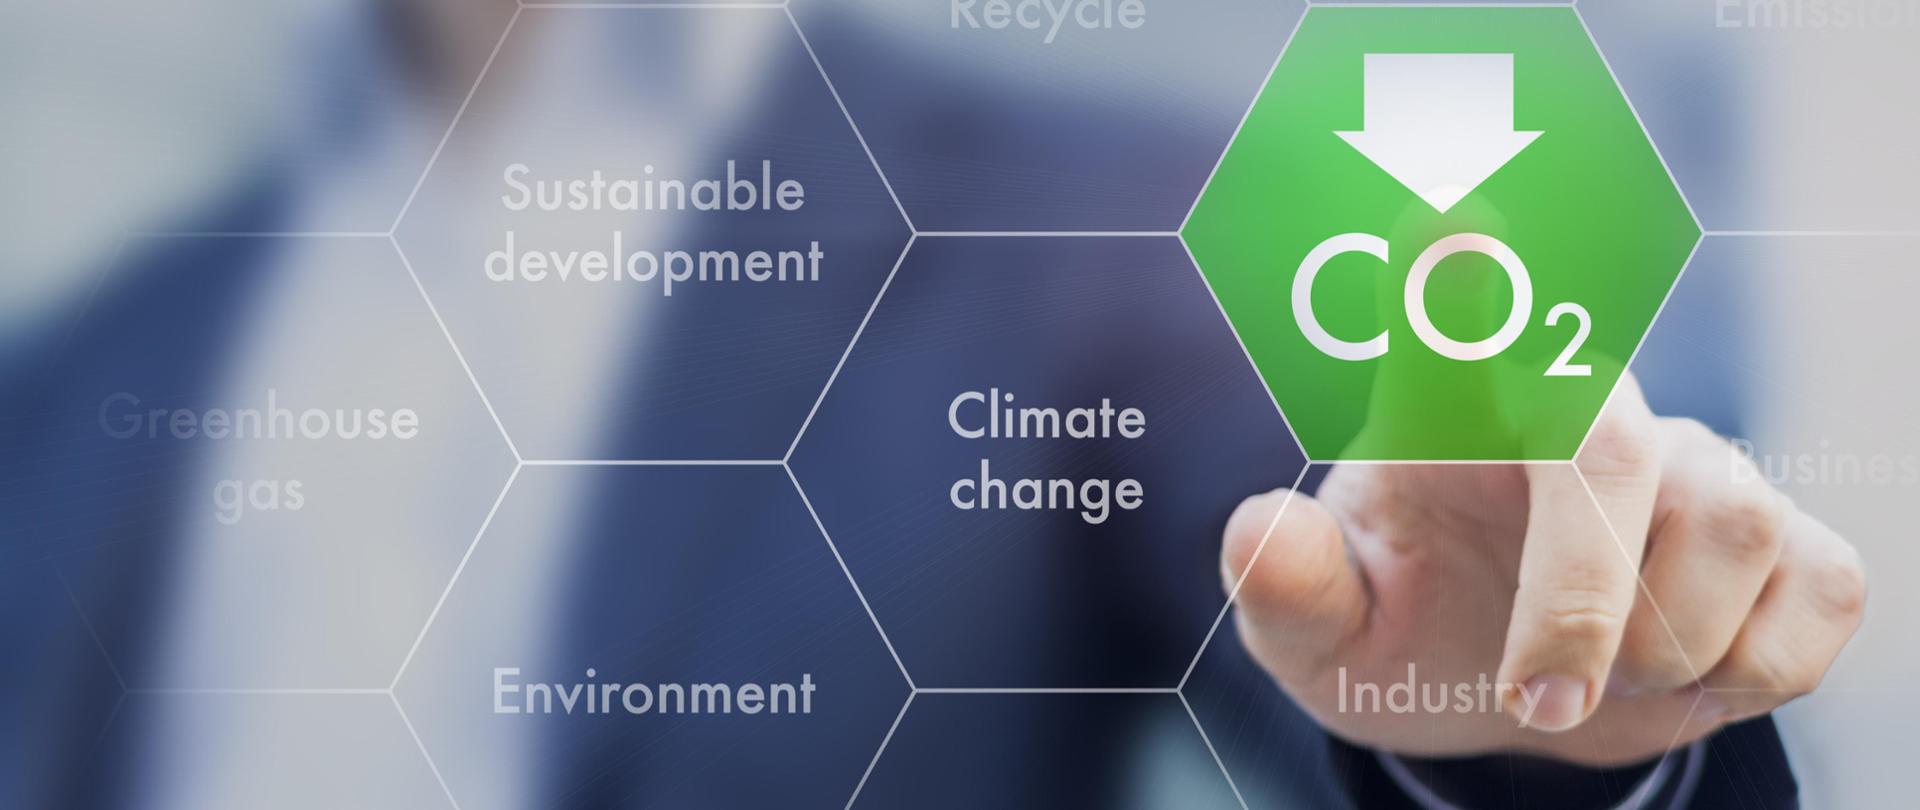 Reduce greenhouse gas emission for climate change and sustainable development